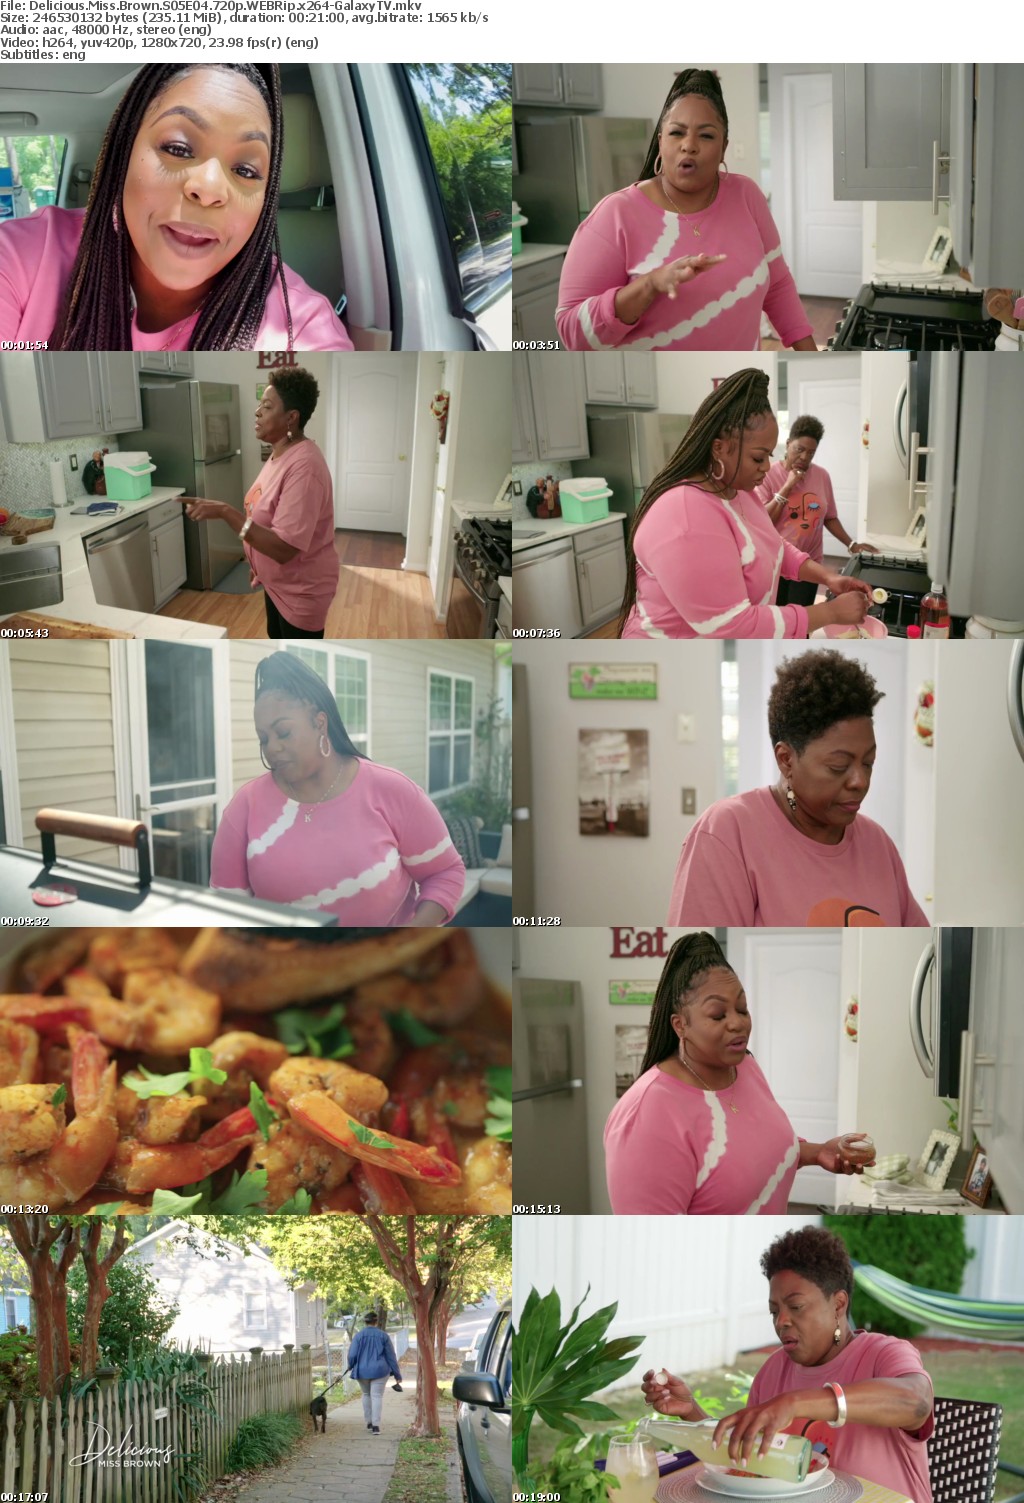 Delicious Miss Brown S05 COMPLETE 720p WEBRip x264-GalaxyTV